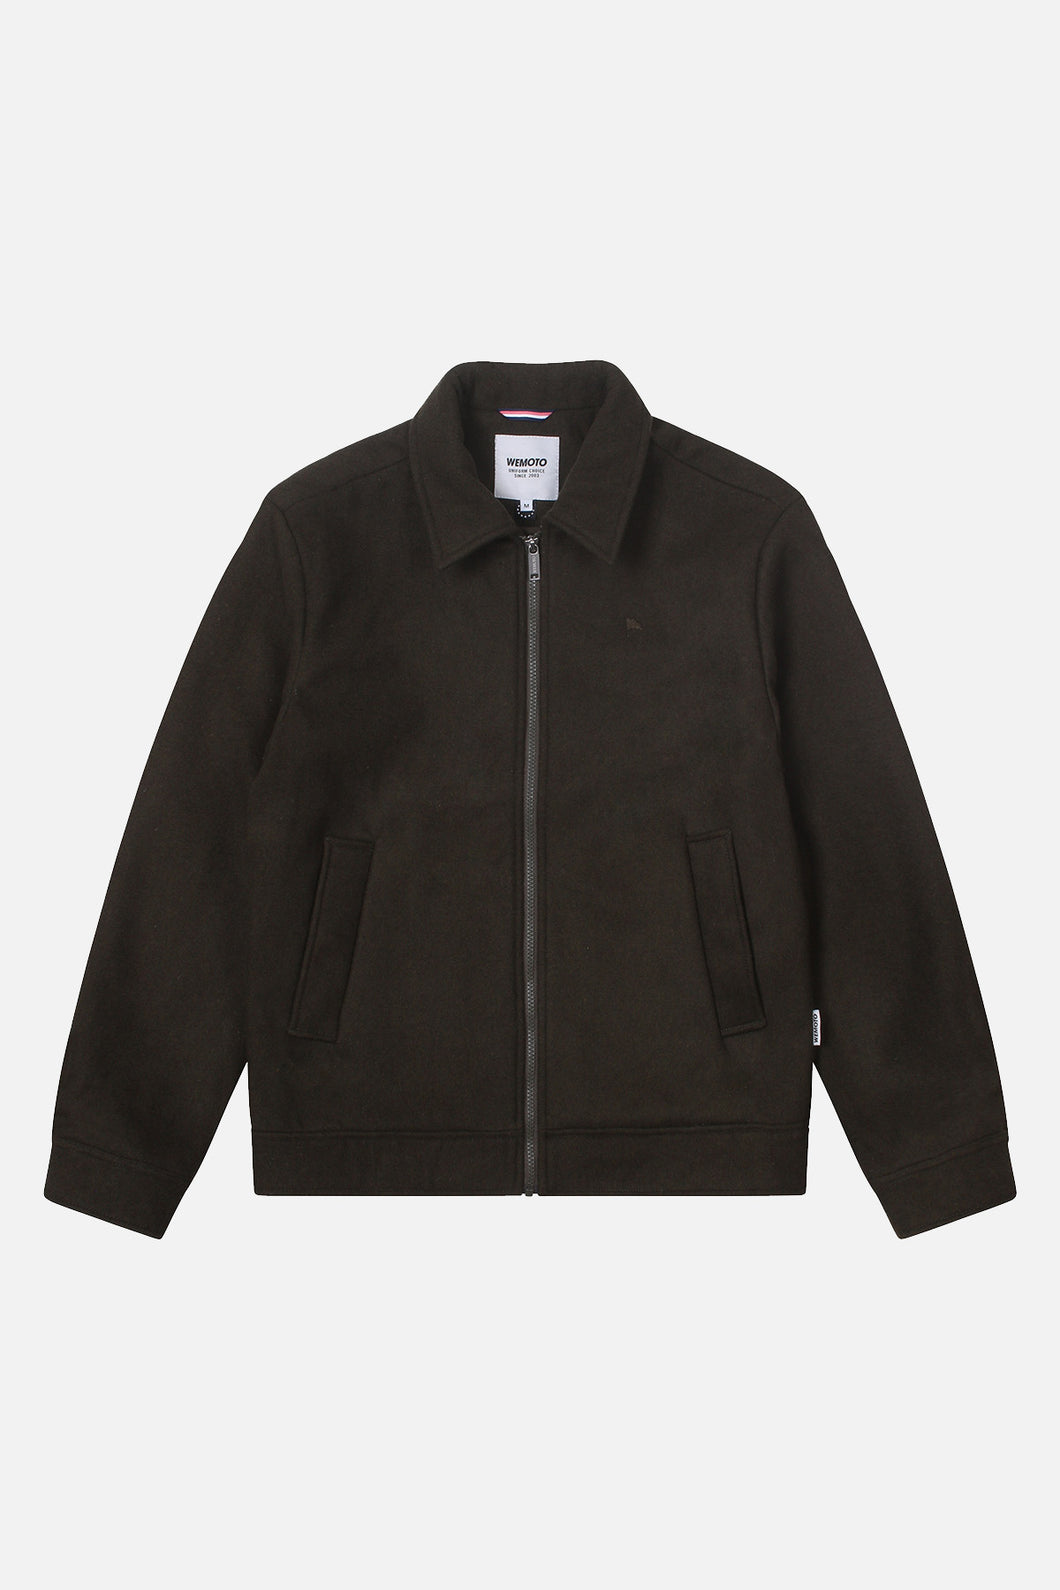 Donnie Worker Jacket Olive